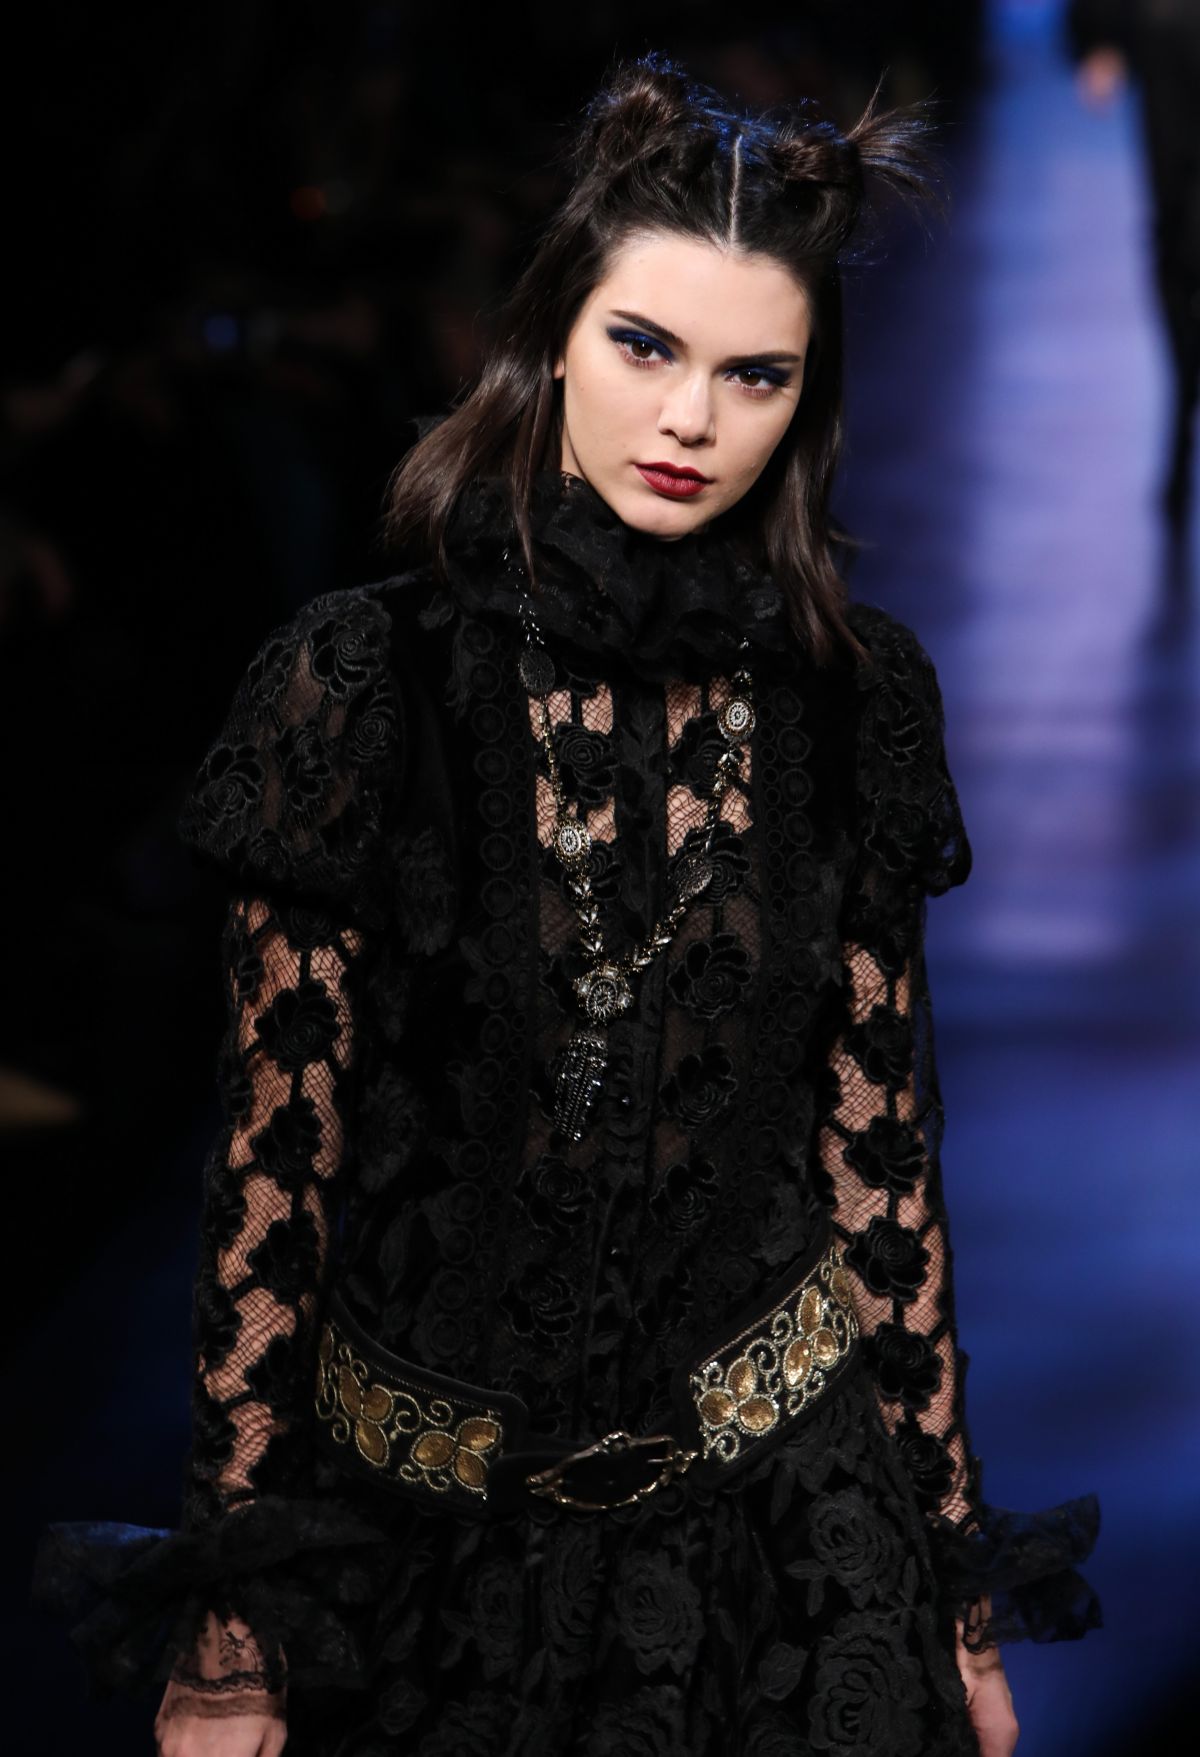 KENDALL JENNER at Anna Sui Fashion Show in New York 02/15/2017 – HawtCelebs